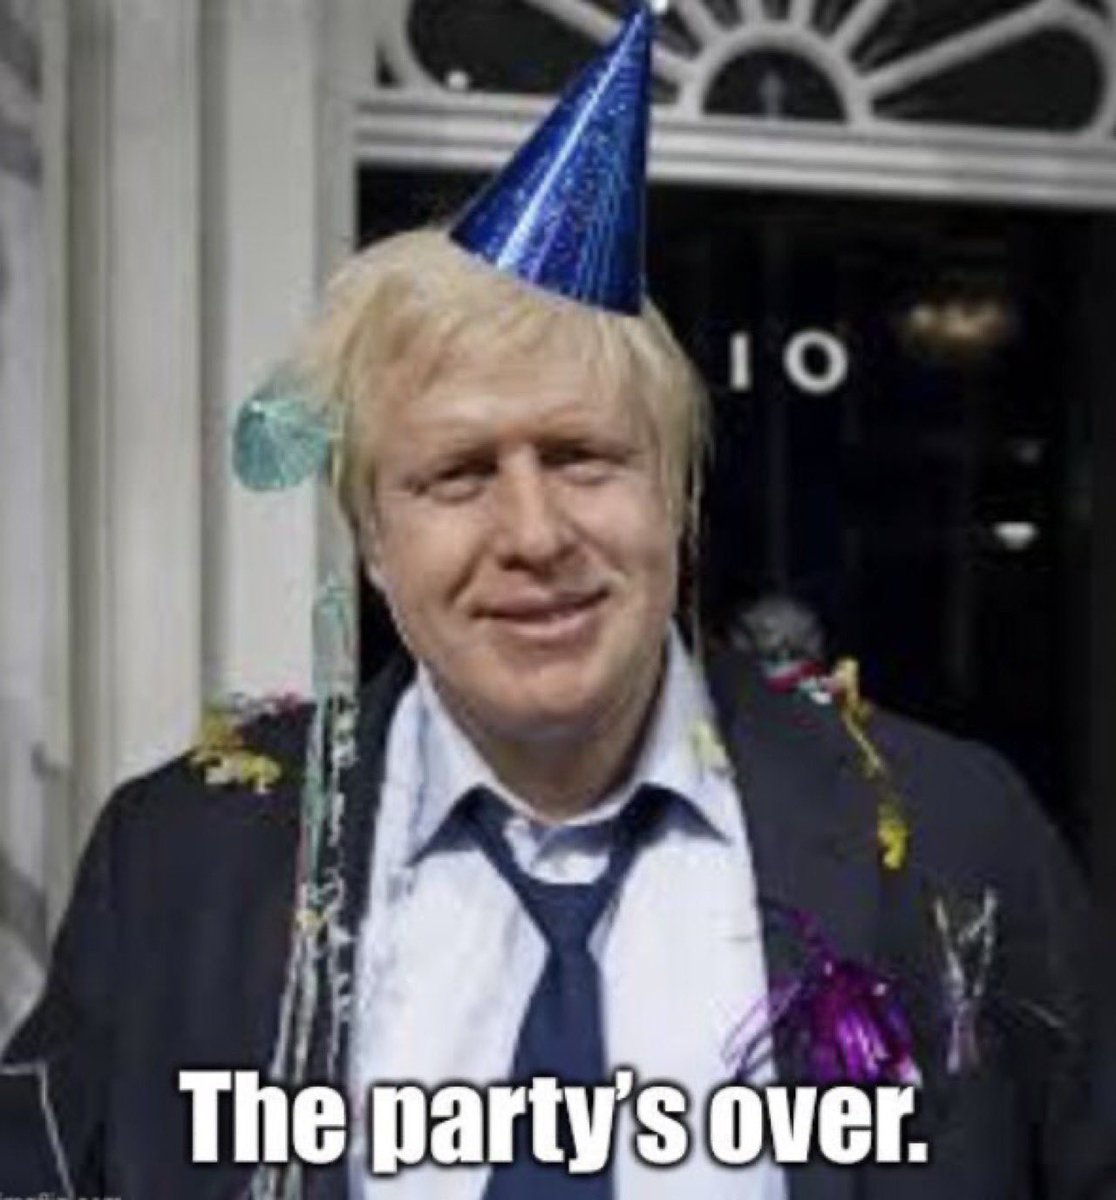 BogJob & his supporters seem very surprised about this so called #PartyGate “Witch hunt”, the Privileges Committee Inquiry has been ongoing for over a year, they’re not very observant 😂

#ToriesOut339 #BorisJohnson #BBCLauraK #Ridge